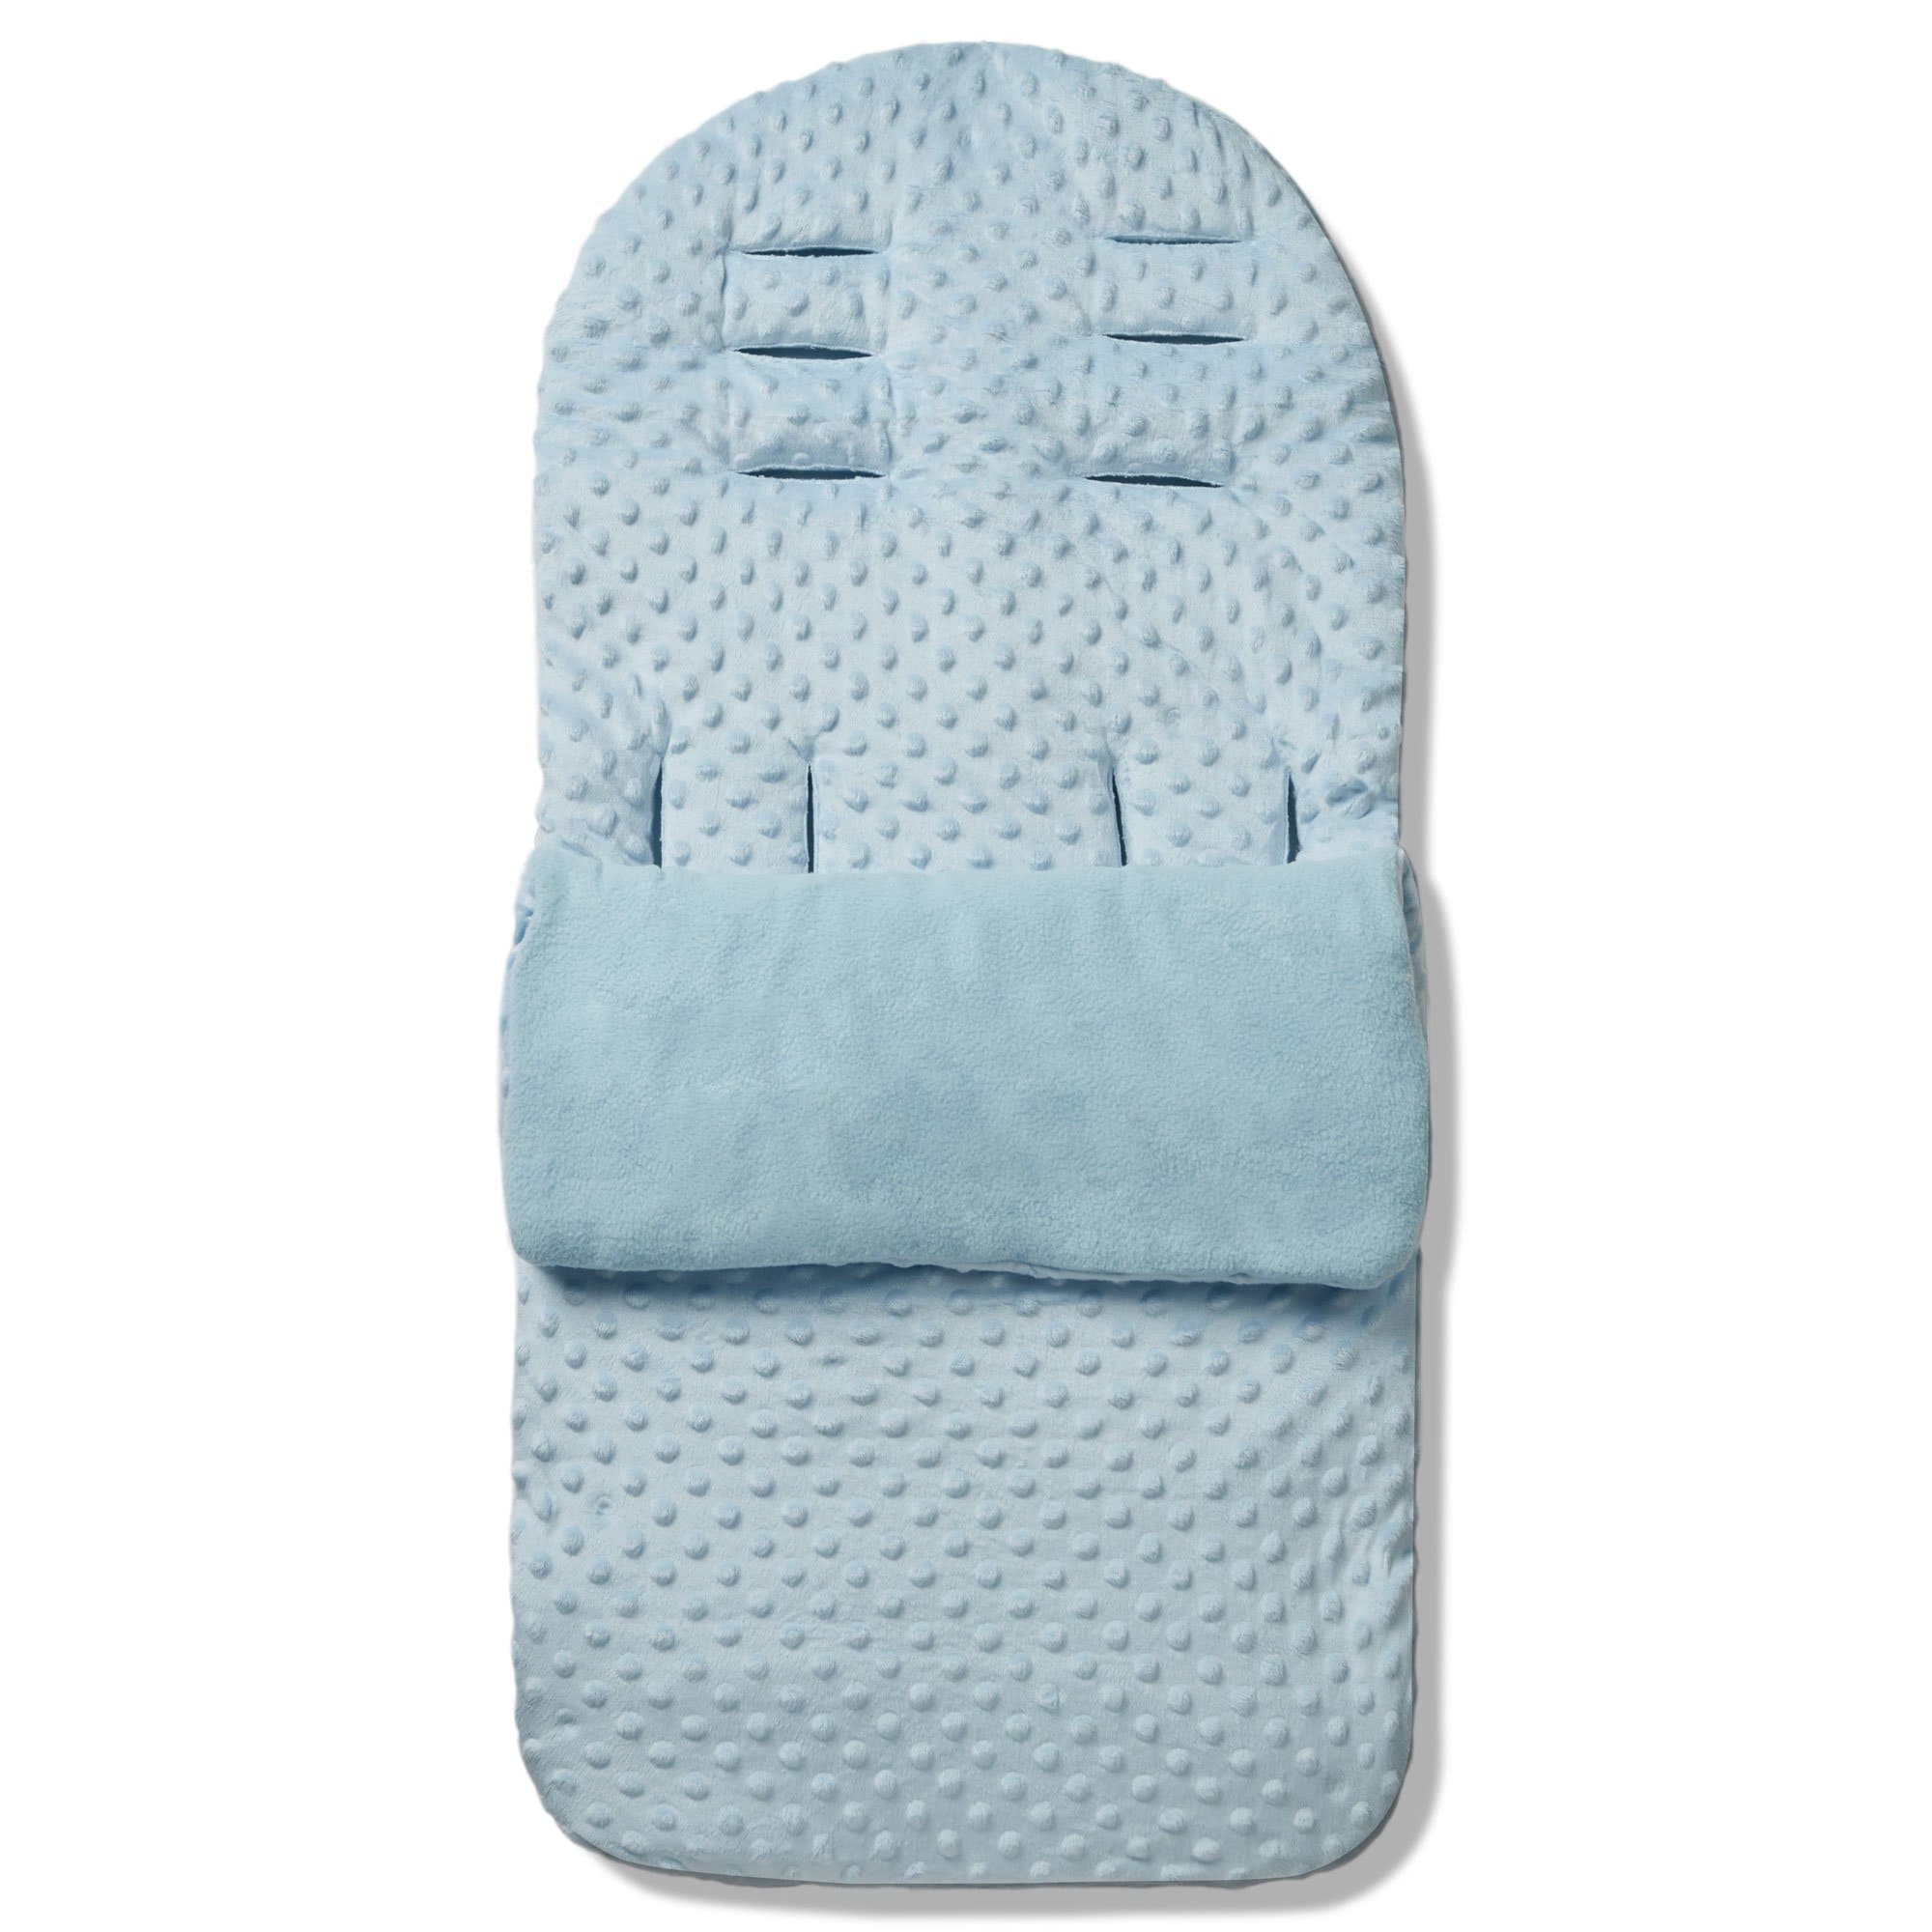 Dimple Footmuff / Cosy Toes Compatible with Easywalker - Blue / Fits All Models | For Your Little One